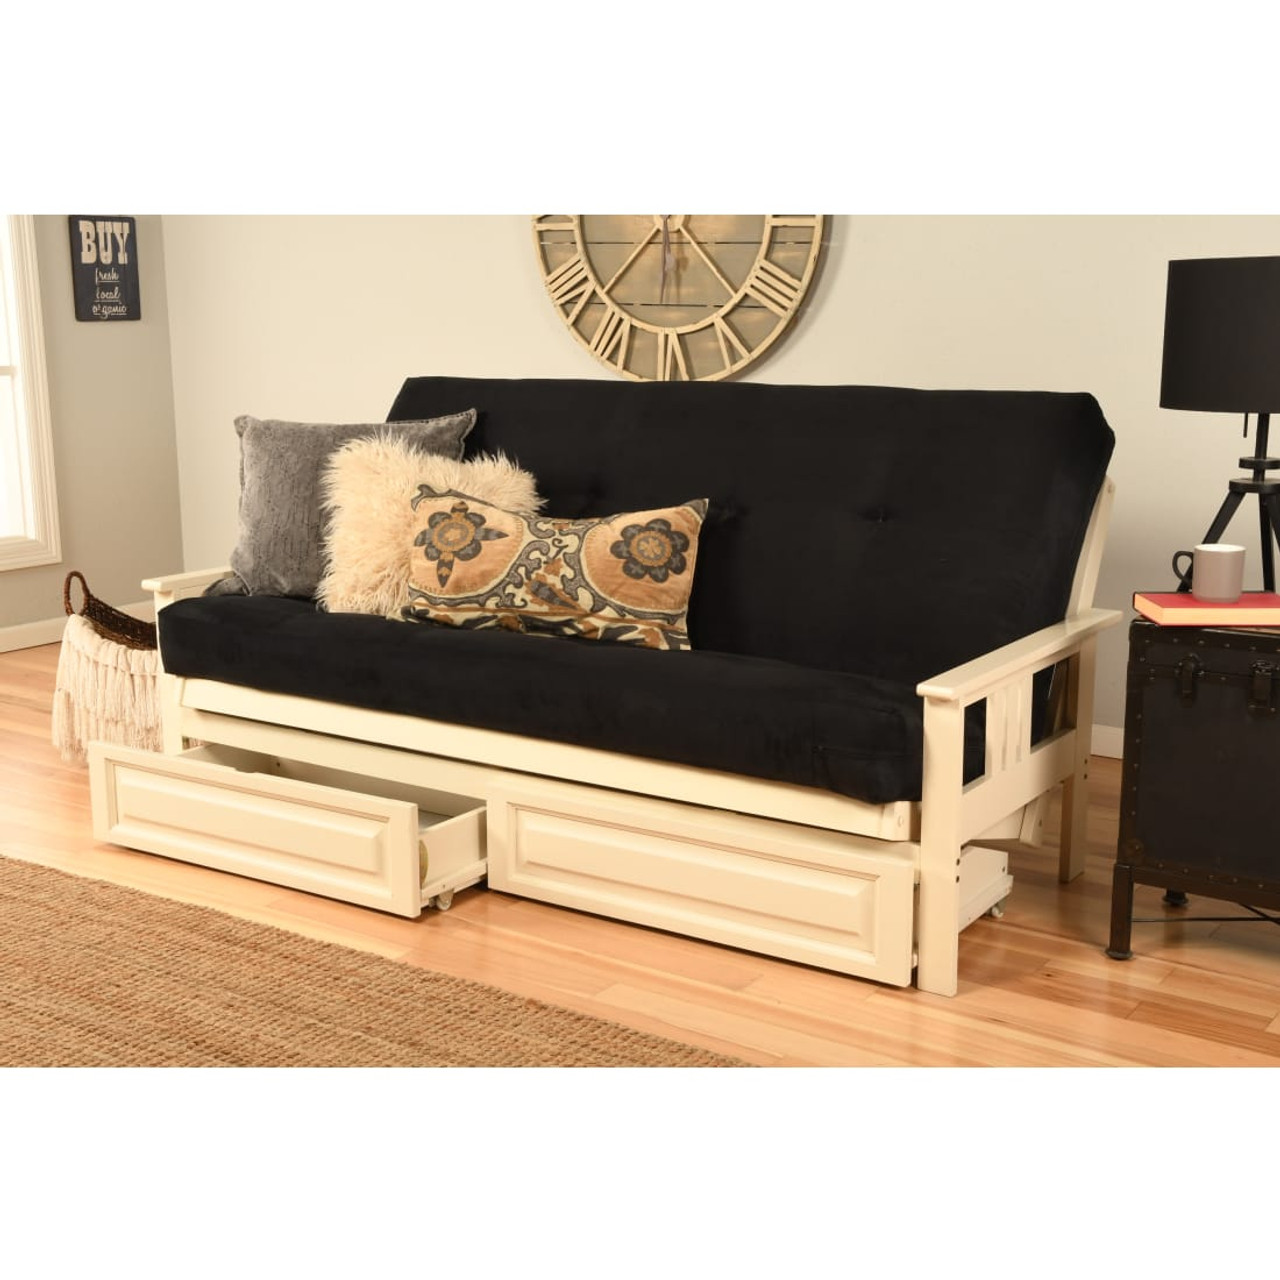 Monterey Futon Frame and Storage Drawers in Antique White Finish with Suede Black Mattress